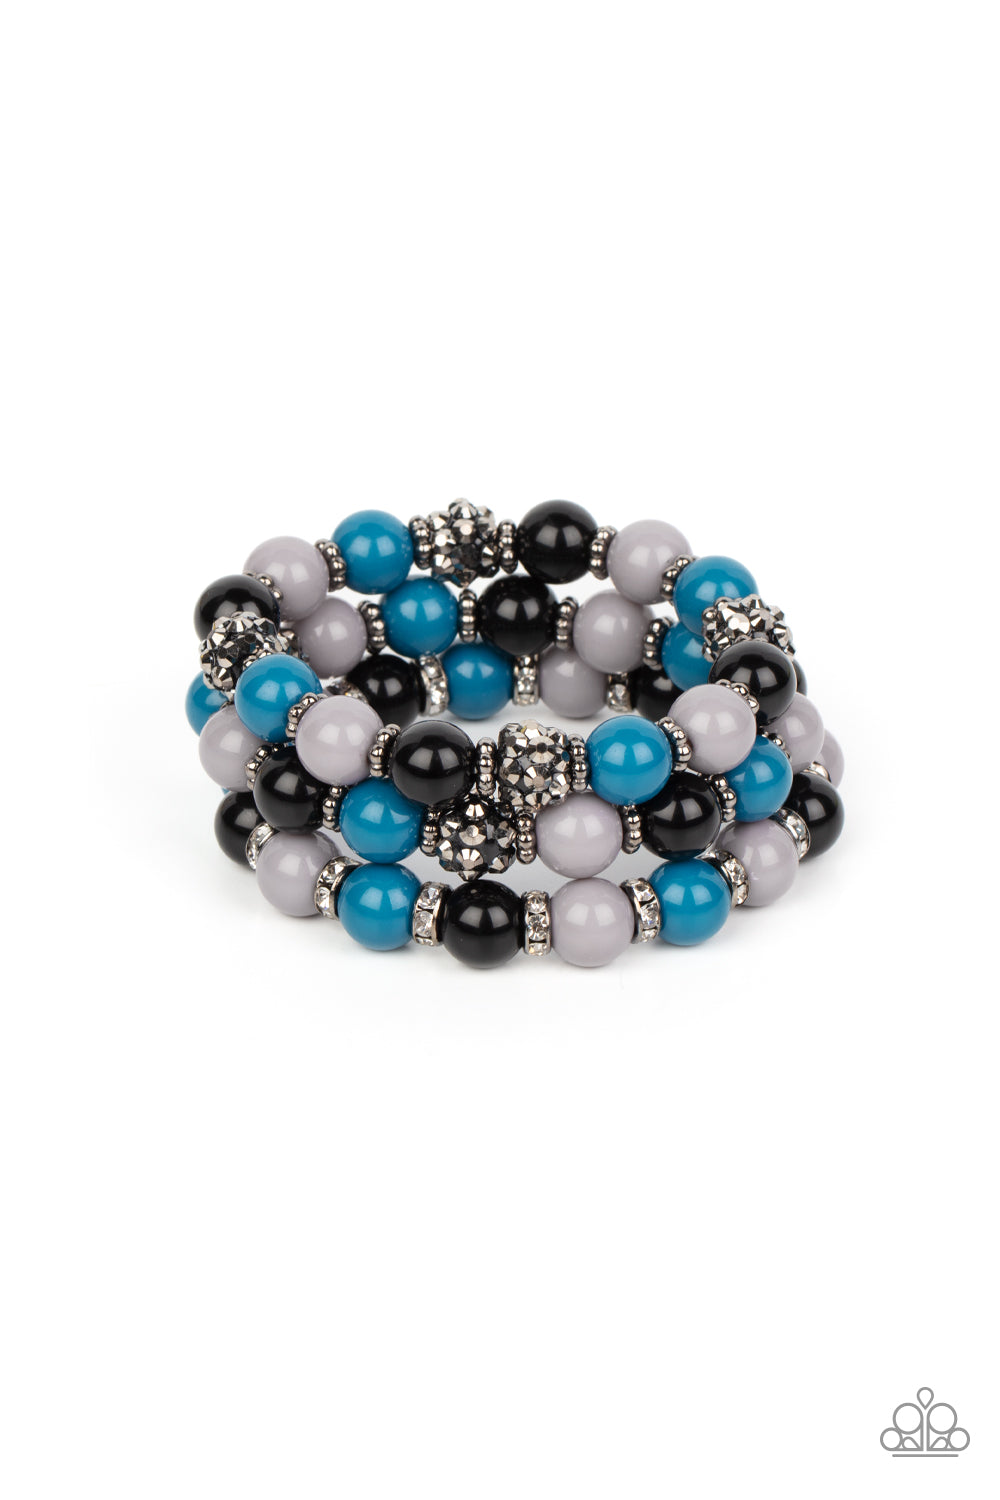 Paparazzi Accessories - Poshly Packing - Multi Bracelets a posh collection of polished multicolored beads, studded gunmetal rings, white rhinestone encrusted rings, and hematite dotted beads are threaded along stretchy bands around the wrist, creating sassy layers.  Sold as one set of three bracelets.